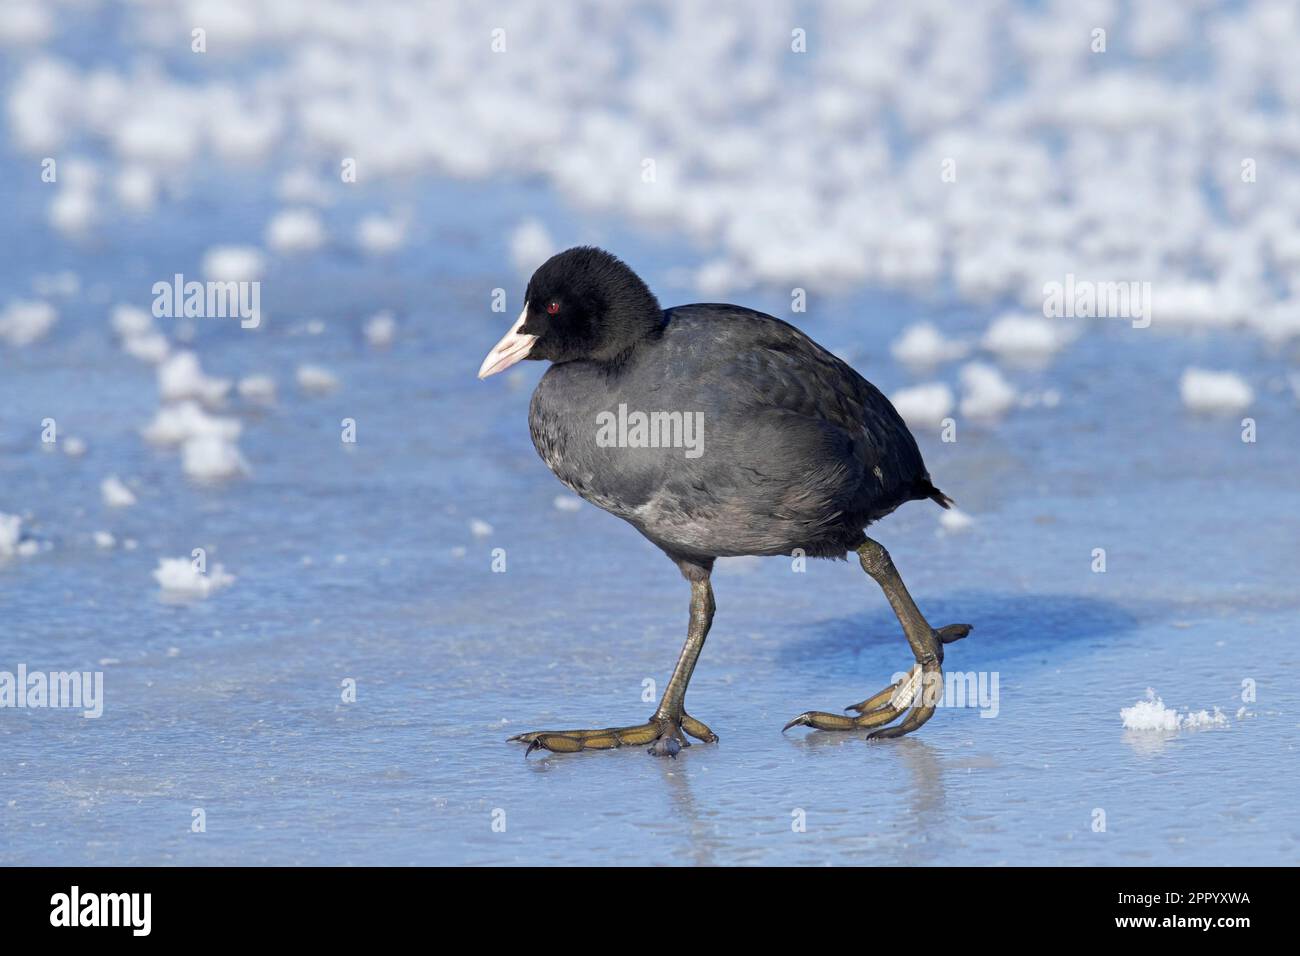 Eurasian coot / common coot (Fulica atra) walking on ice of frozen pond in winter Stock Photo